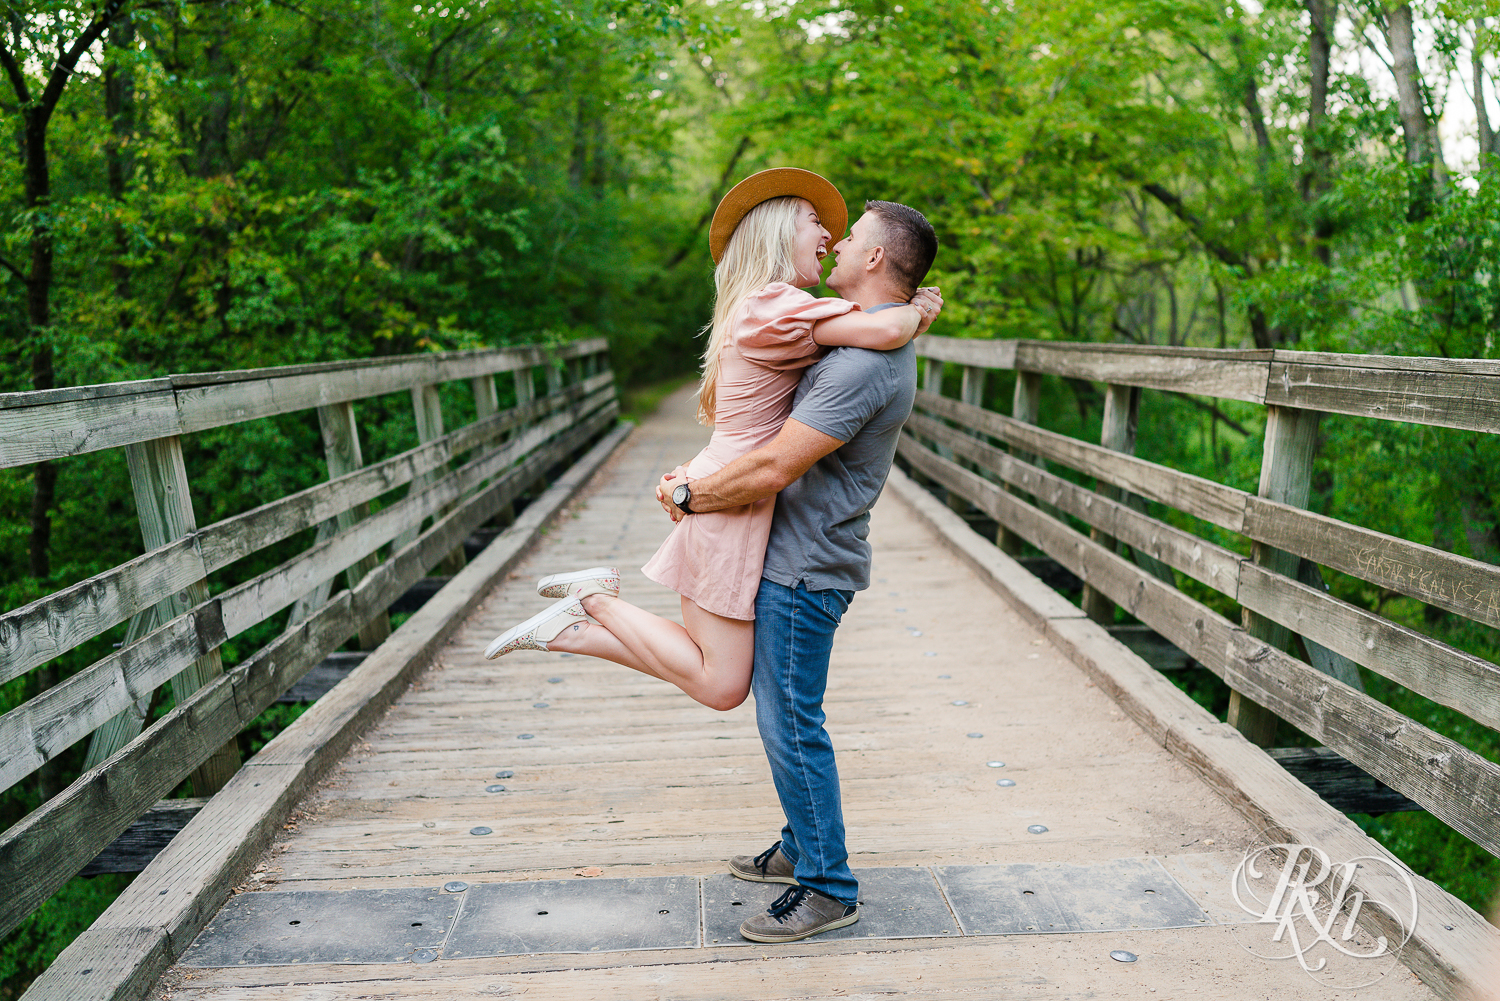 Man lifts blonde woman in hat and dress on a bridge at Afton State Park in Hastings, Minnesota.